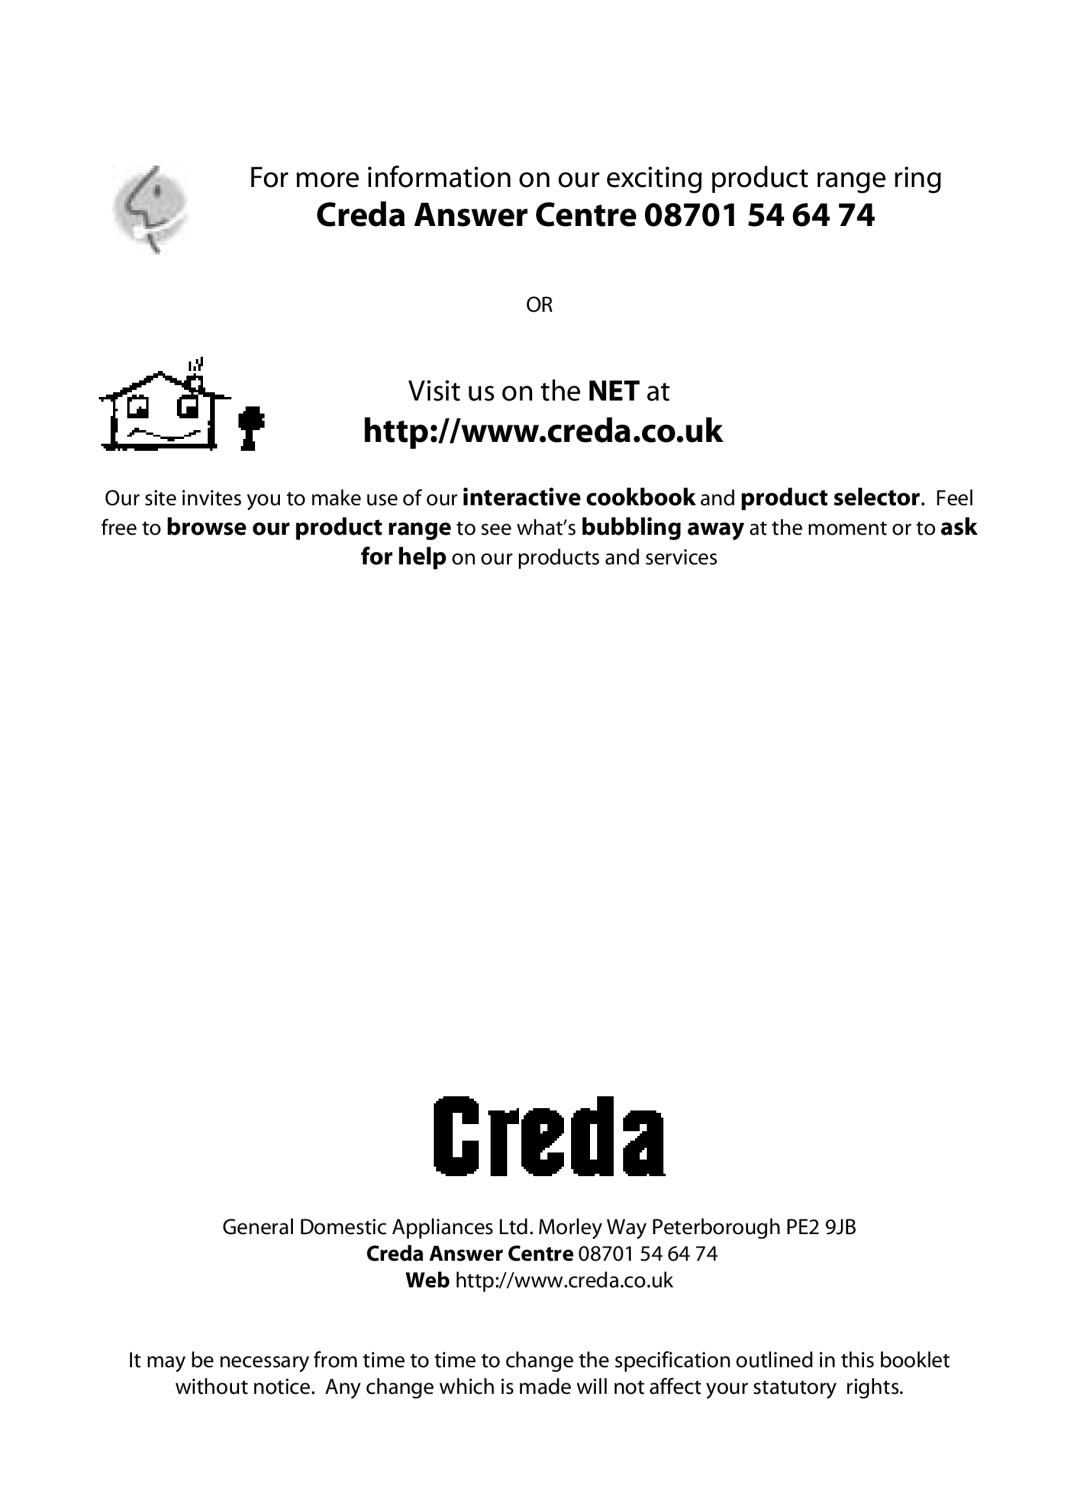 Creda X252E manual Creda Answer Centre 08701 54 64, For more information on our exciting product range ring 